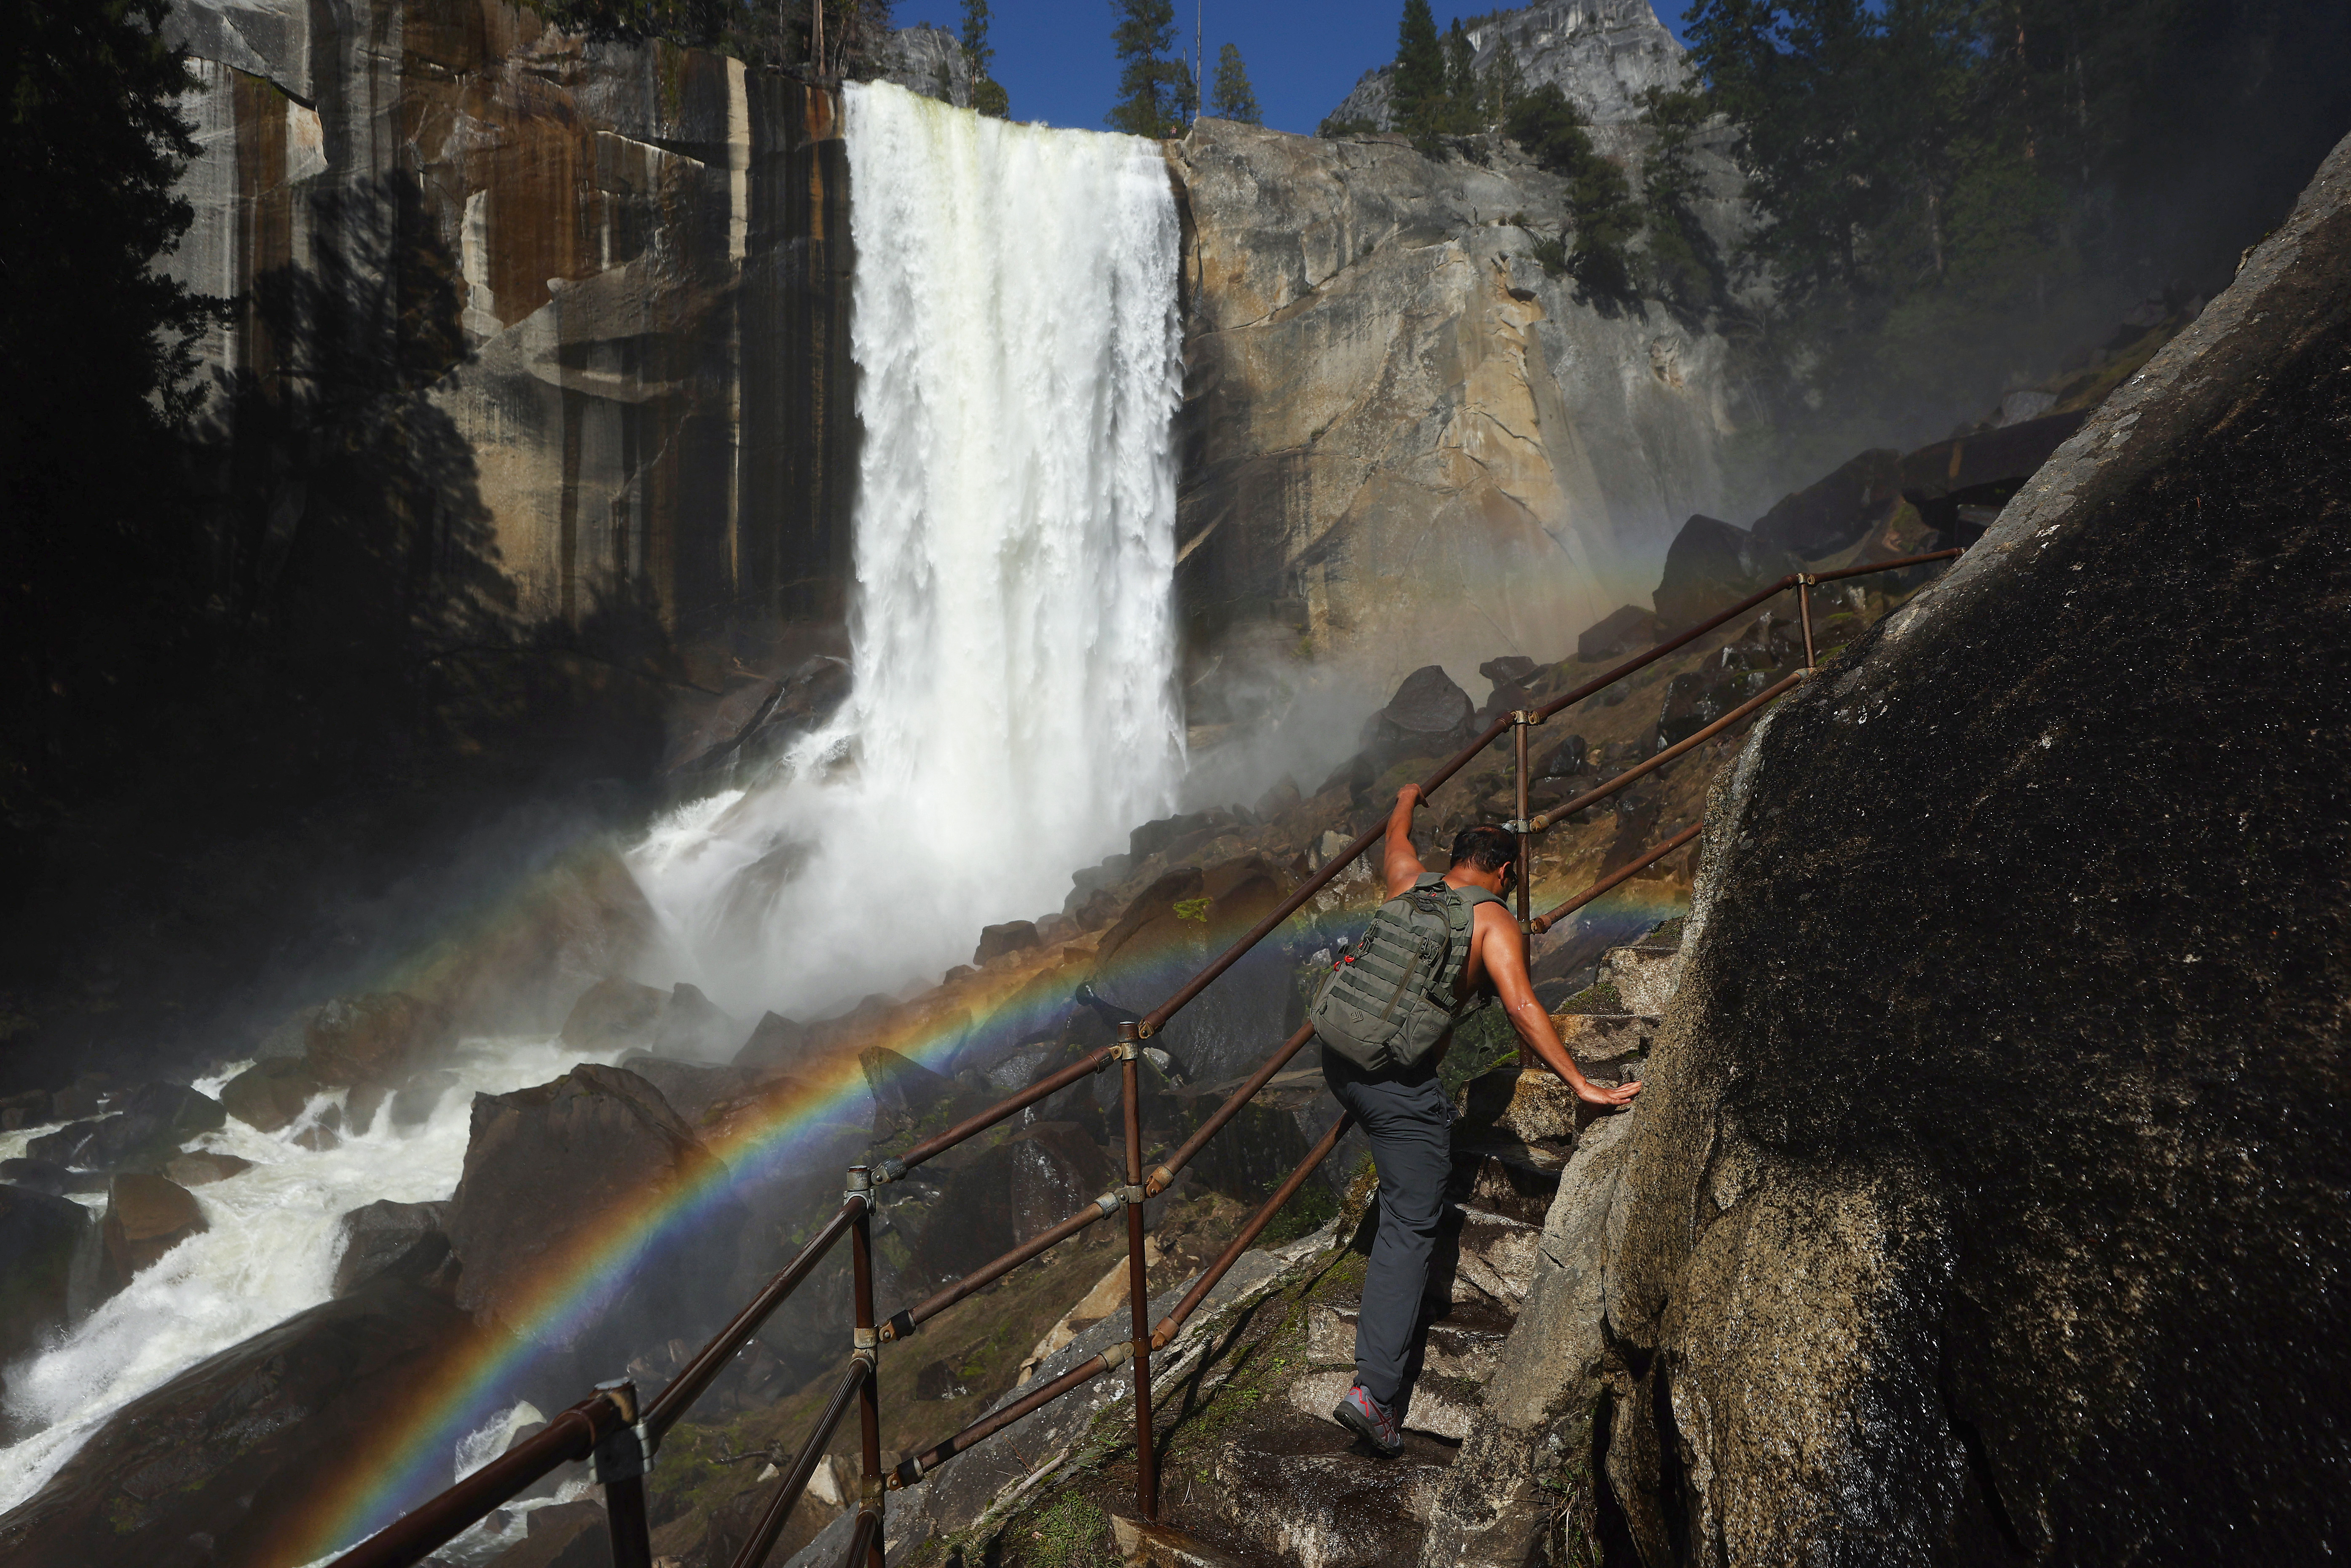 A person climbs a stairway leading to the top of Vernal Fall, with a rainbow visible, as warming temperatures have increased snowpack runoff, on April 28, 2023 in Yosemite National Park, California. 